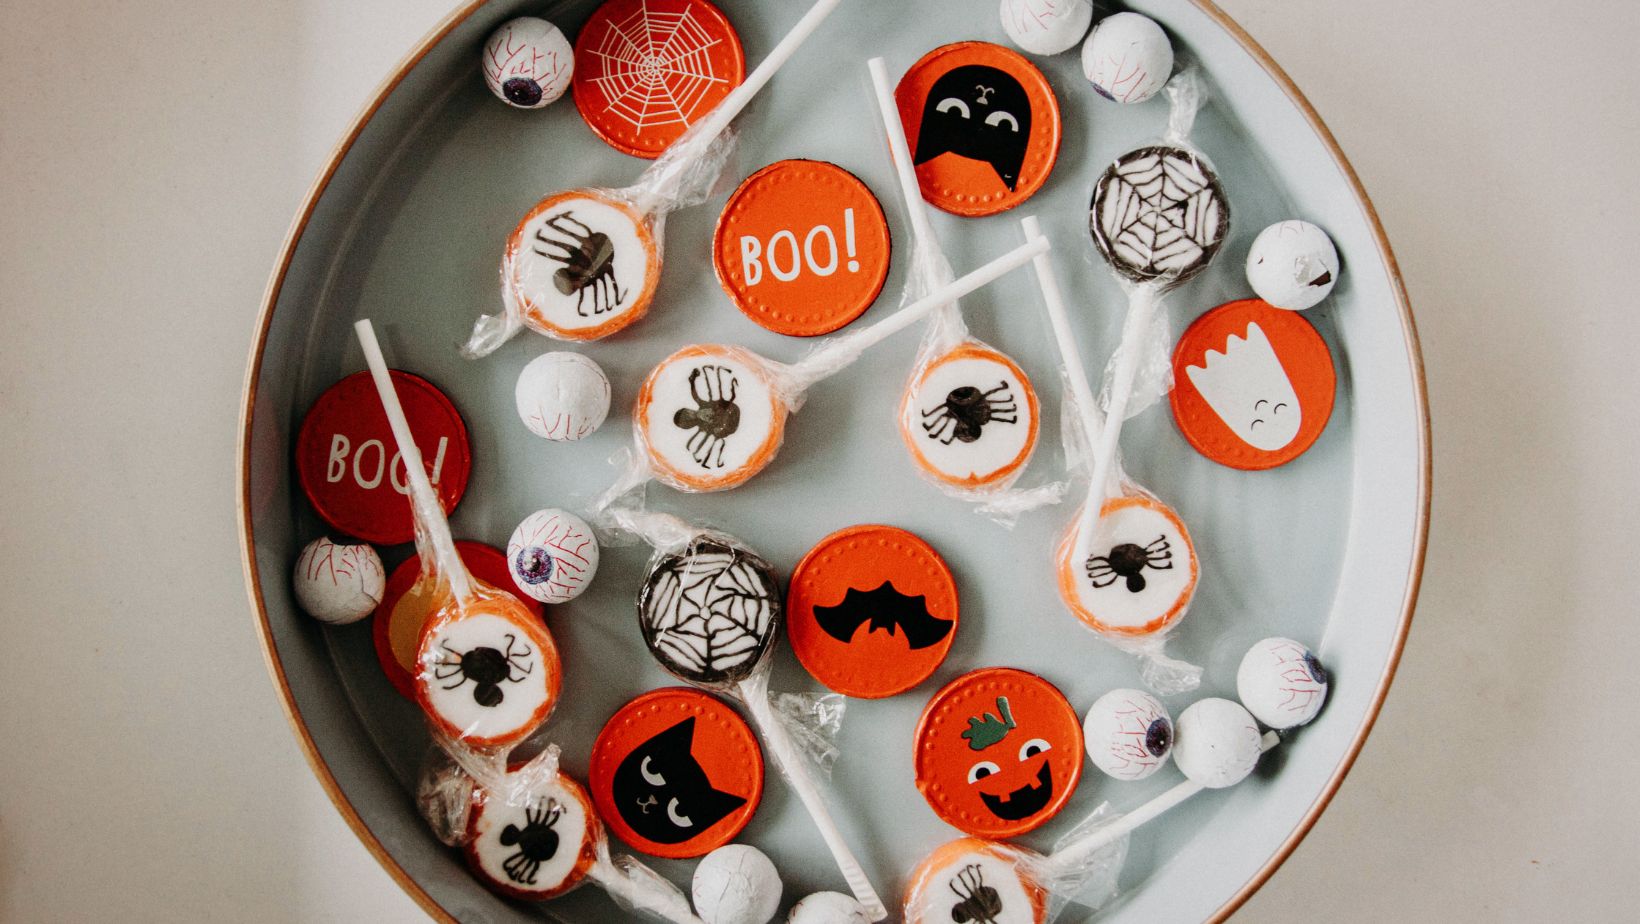 What Halloween Candy Can You Eat With Braces?